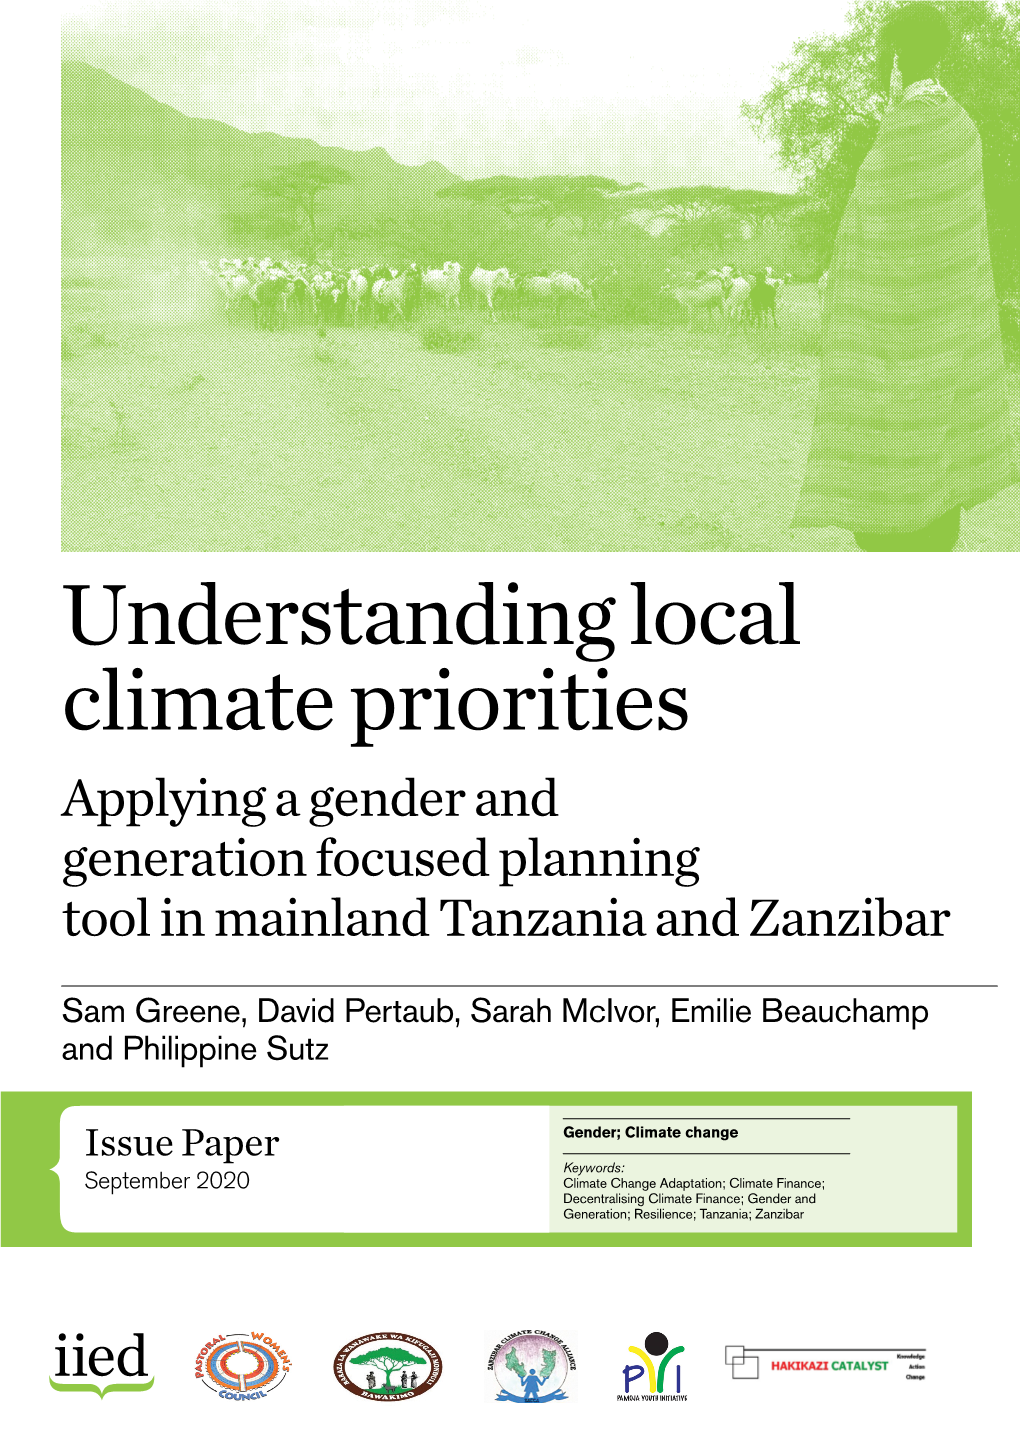 Understanding Local Climate Priorities Applying a Gender and Generation Focused Planning Tool in Mainland Tanzania and Zanzibar